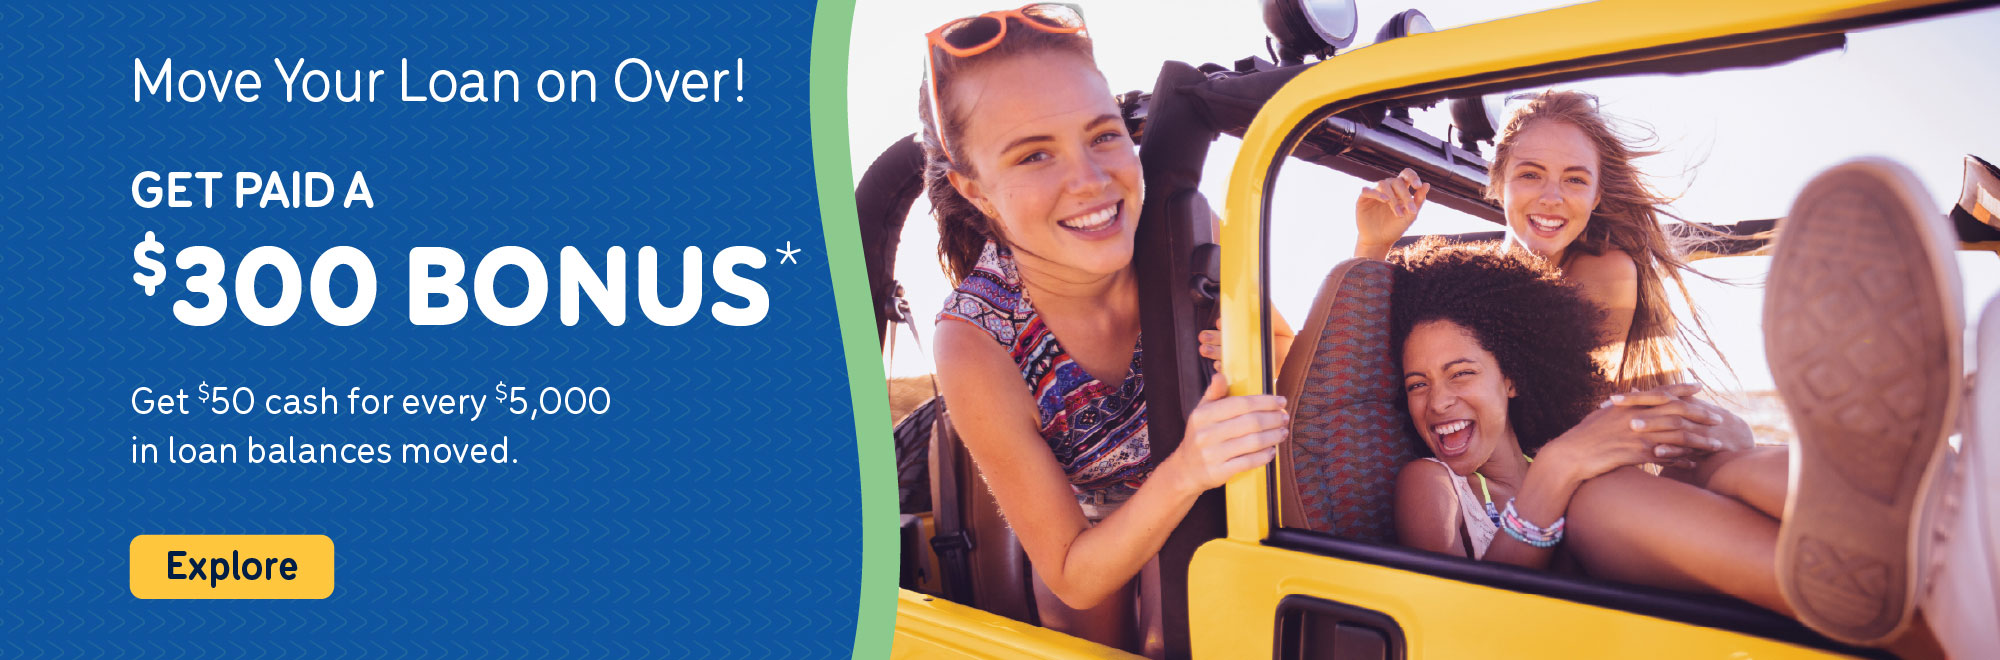 Get paid a $300 Bonus* when you move your loan on over to us! Get $50 cash for every $5,000 in loan balances moved.